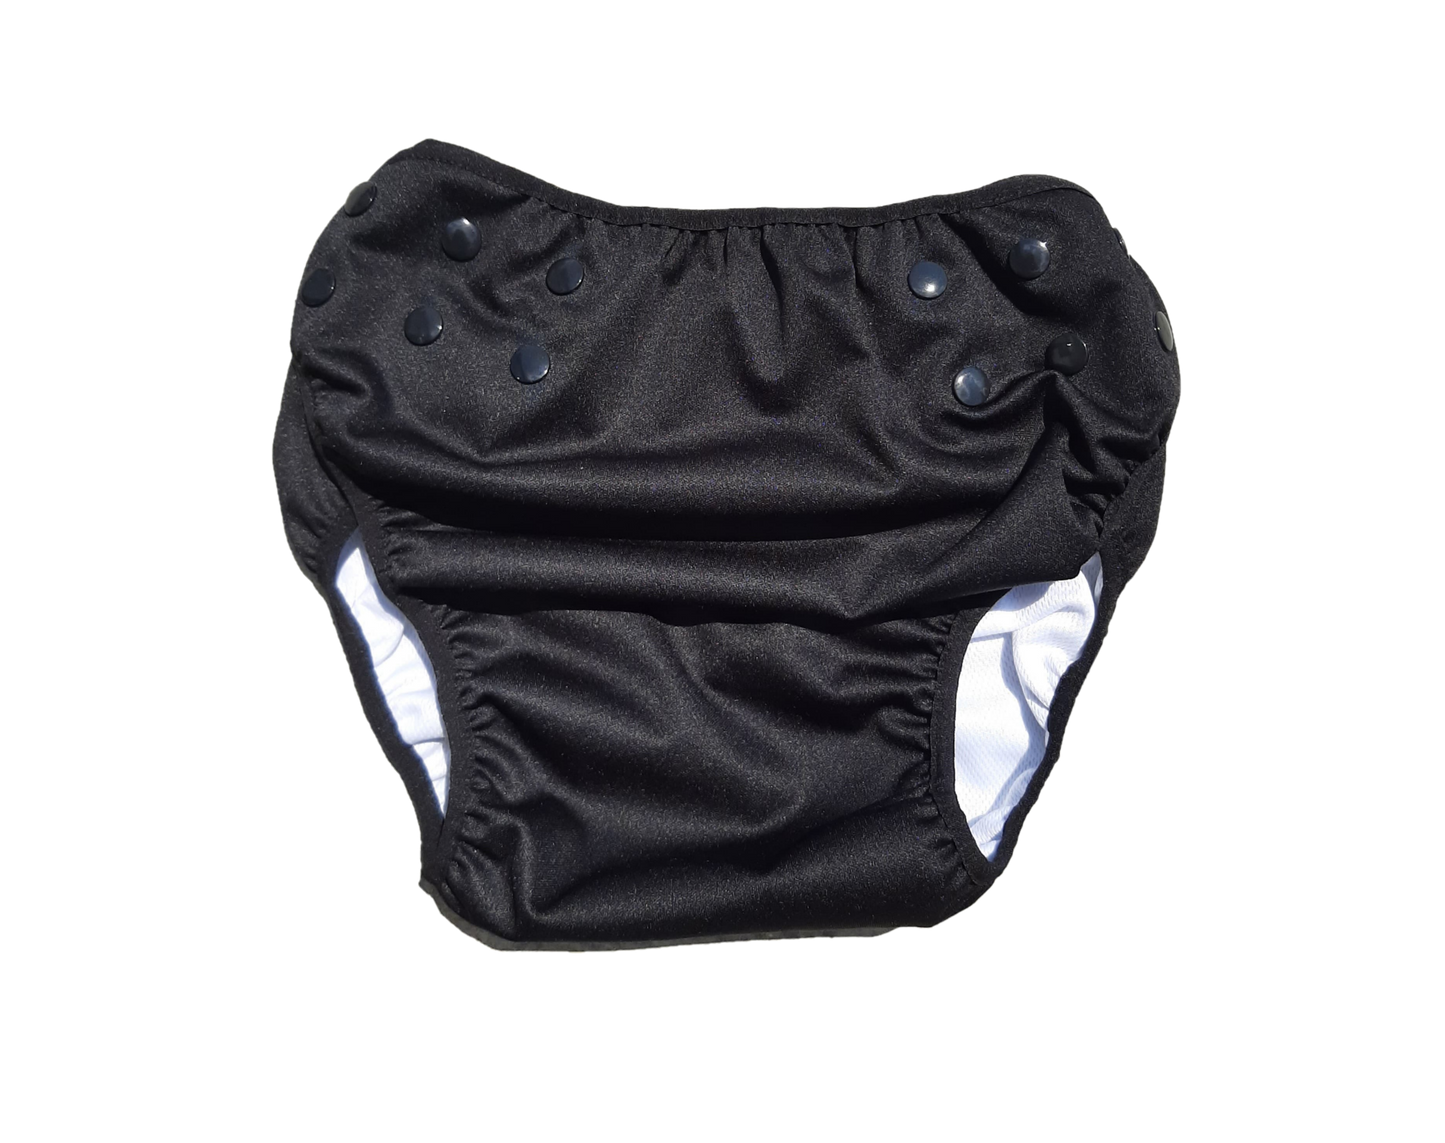 Swim diaper for person with disabilities  Produits Adaptés Handy –  Produits Adaptés Handy